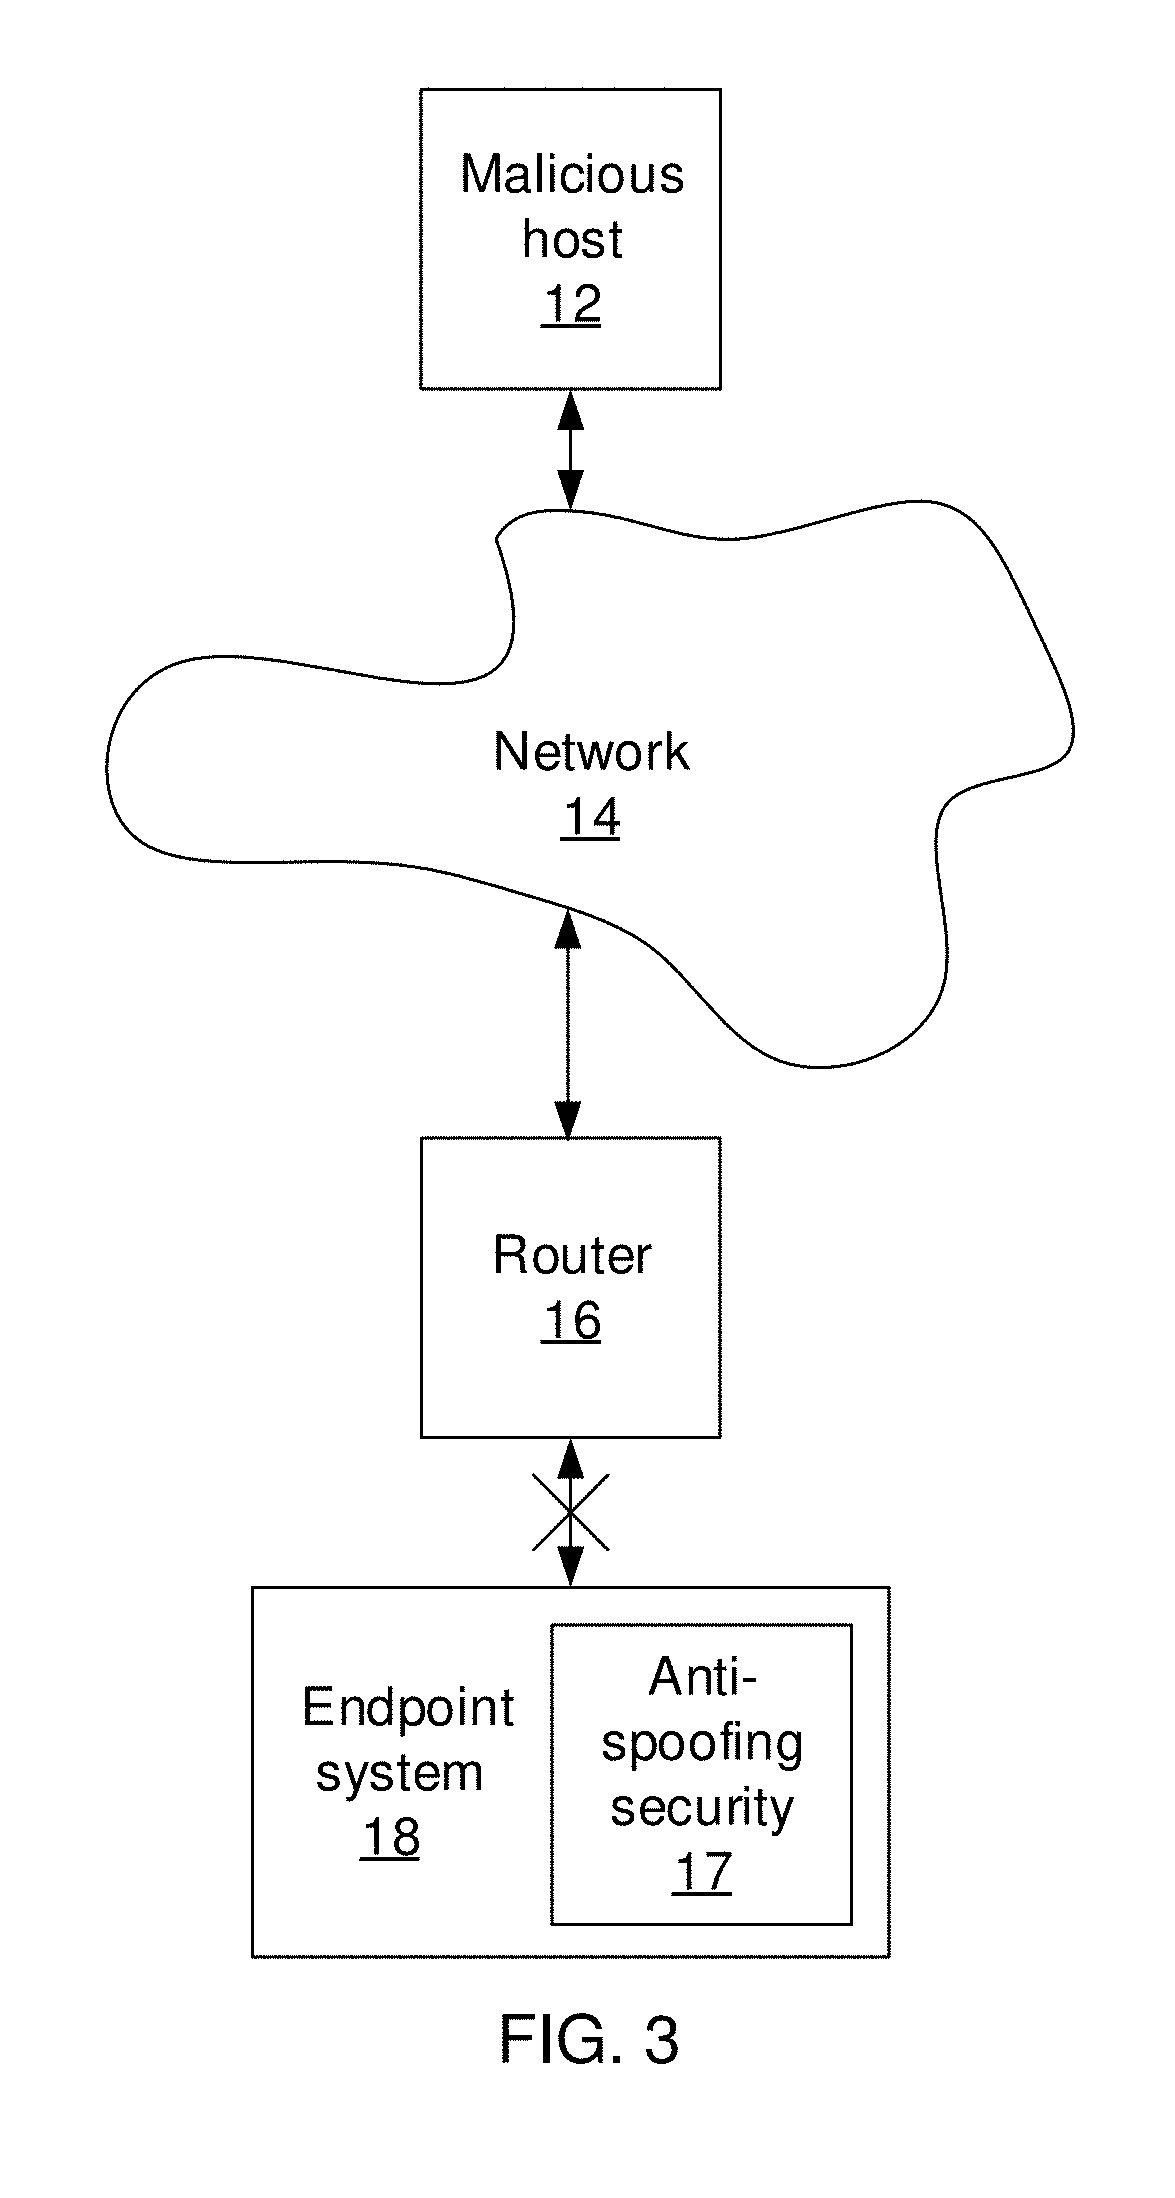 Network gateway spoofing detection and mitigation